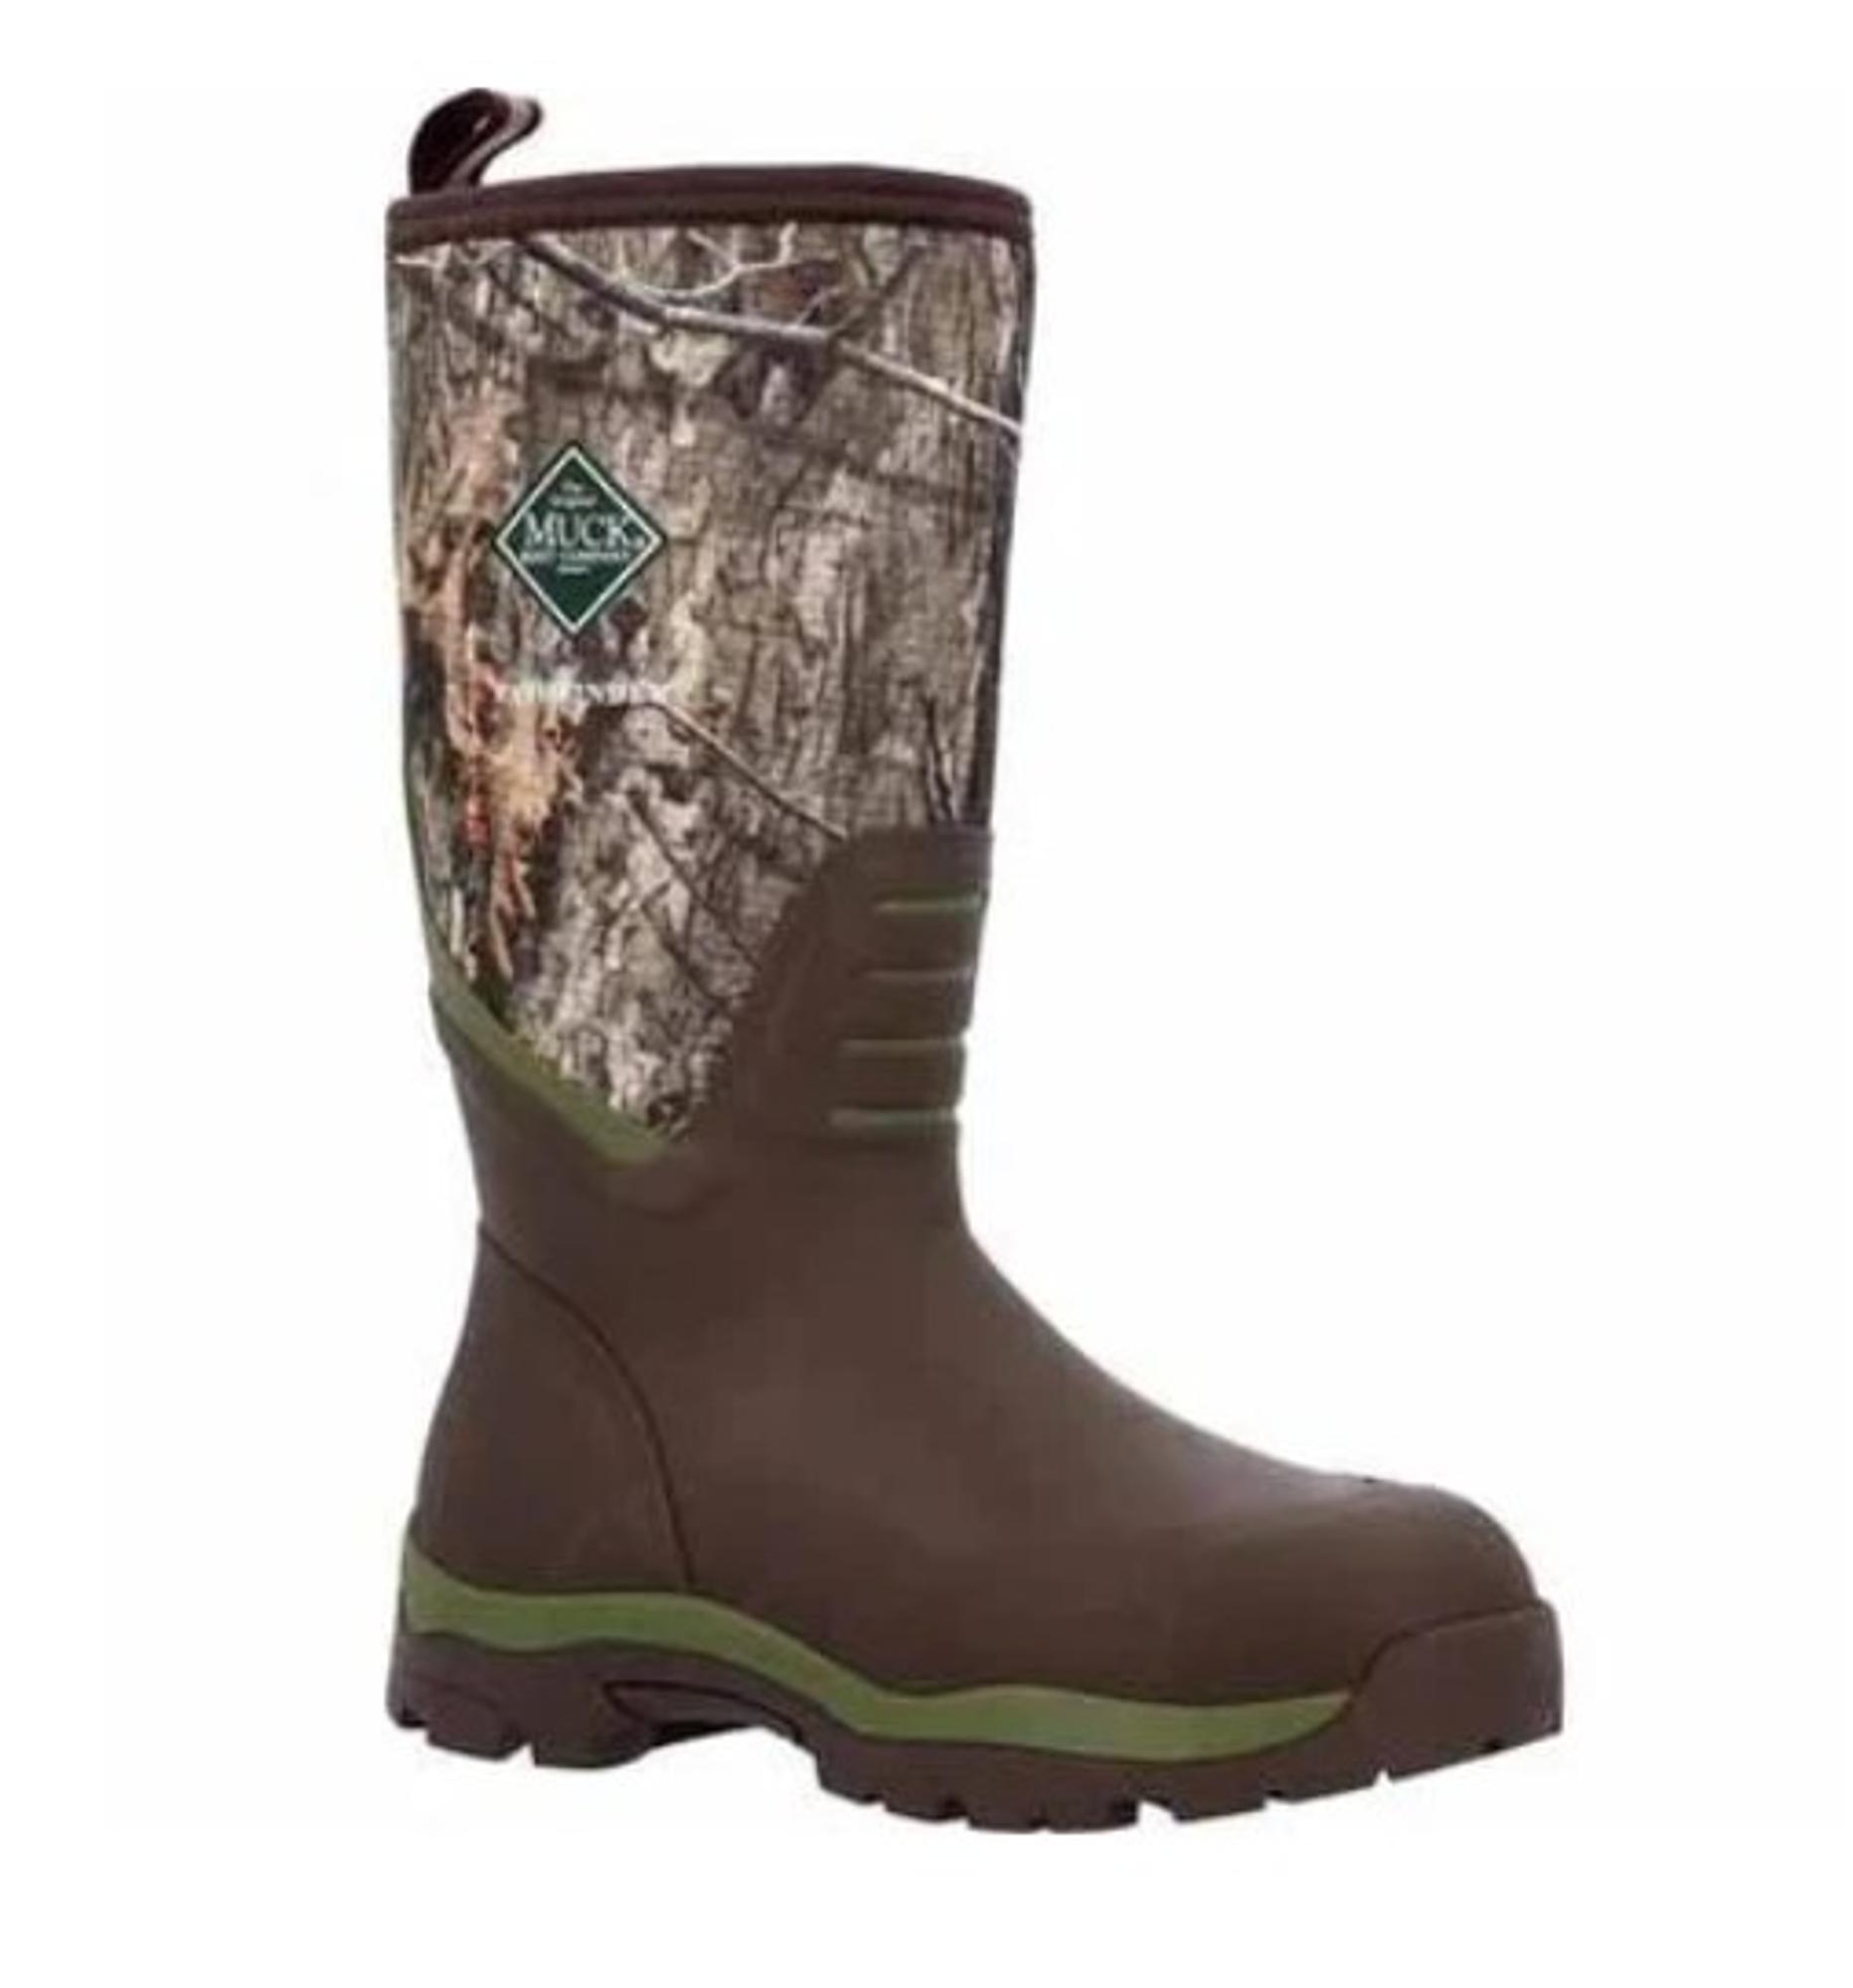 Men's Mossy Oak Country Dna Patchfinder Boots